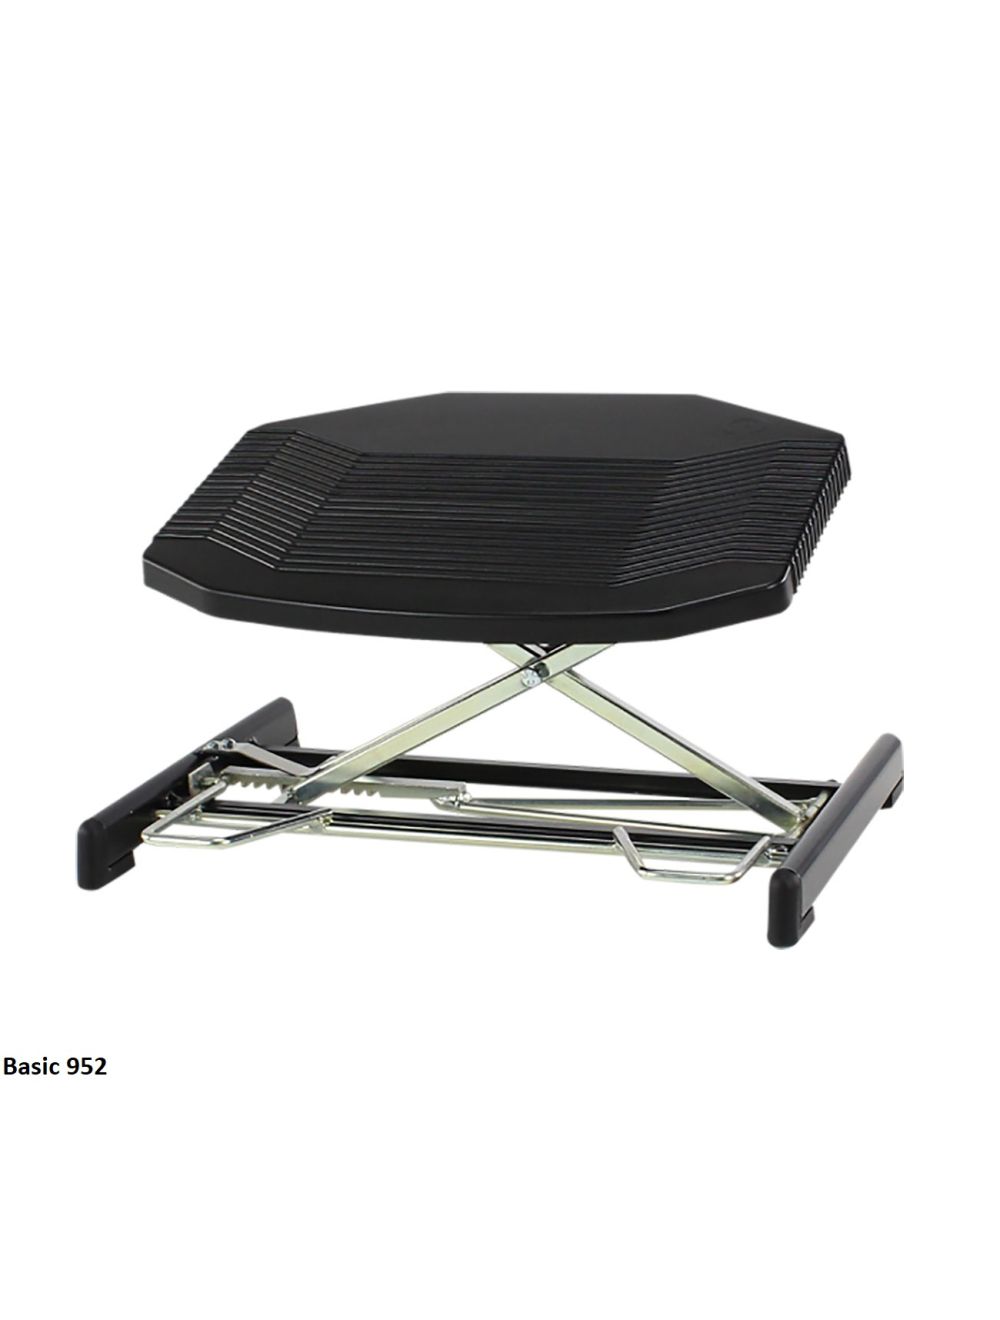 Footrest Basic 950/952 and Pro 952/959